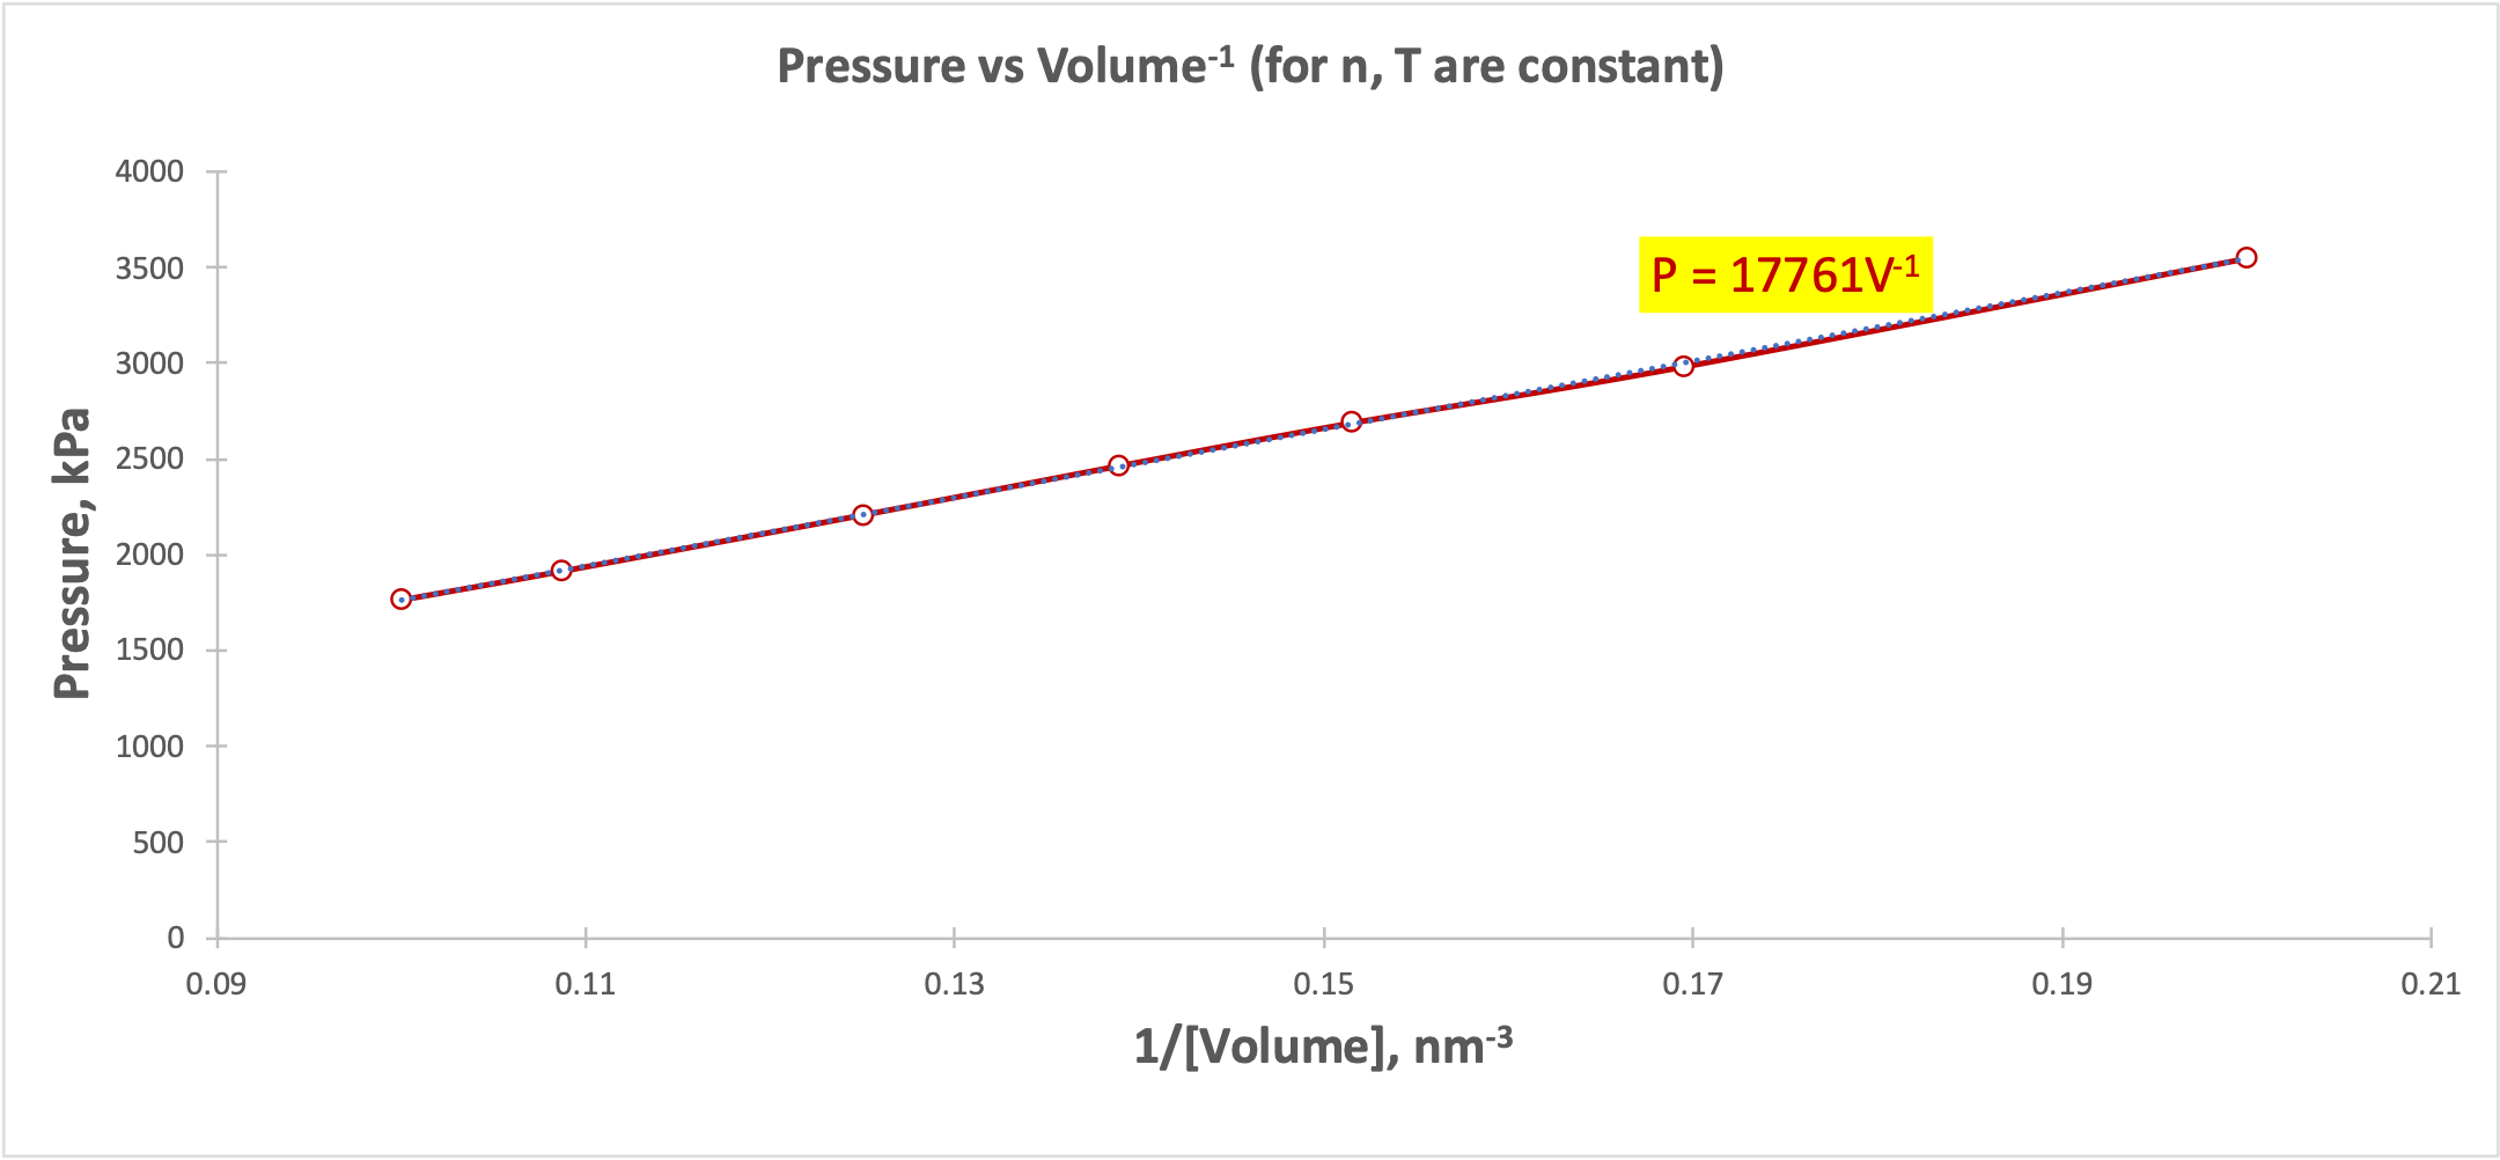 Dependence of pressure on the reverse volume at constant temperature and mole number